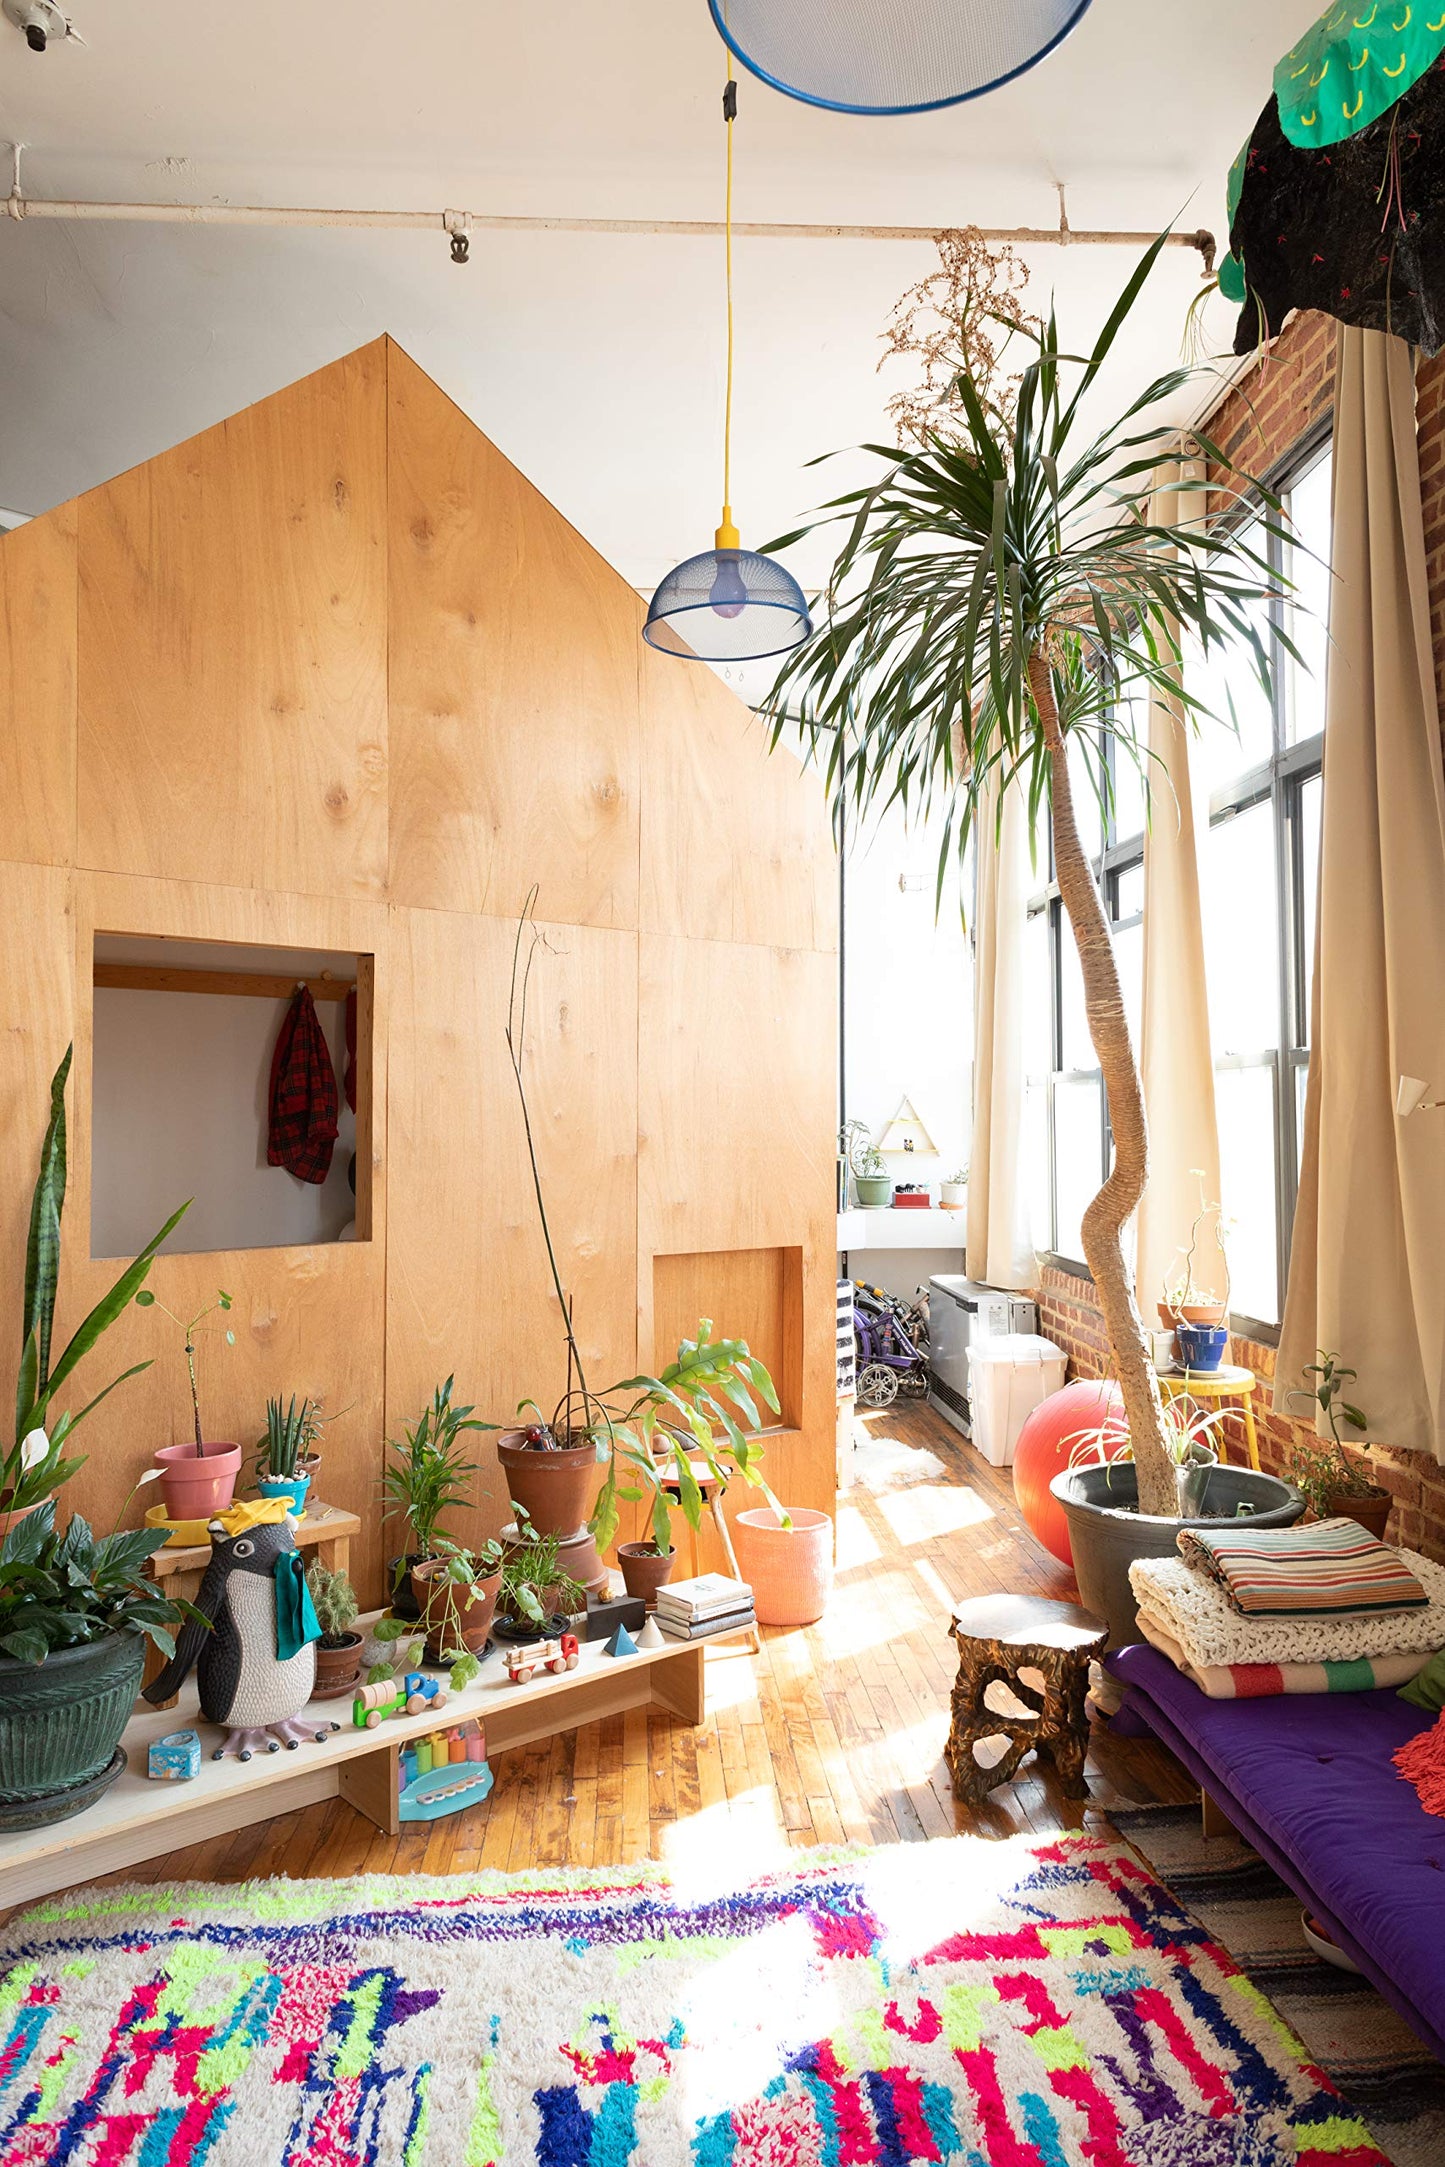 Creative Spaces // People, Homes, and Studios to Inspire